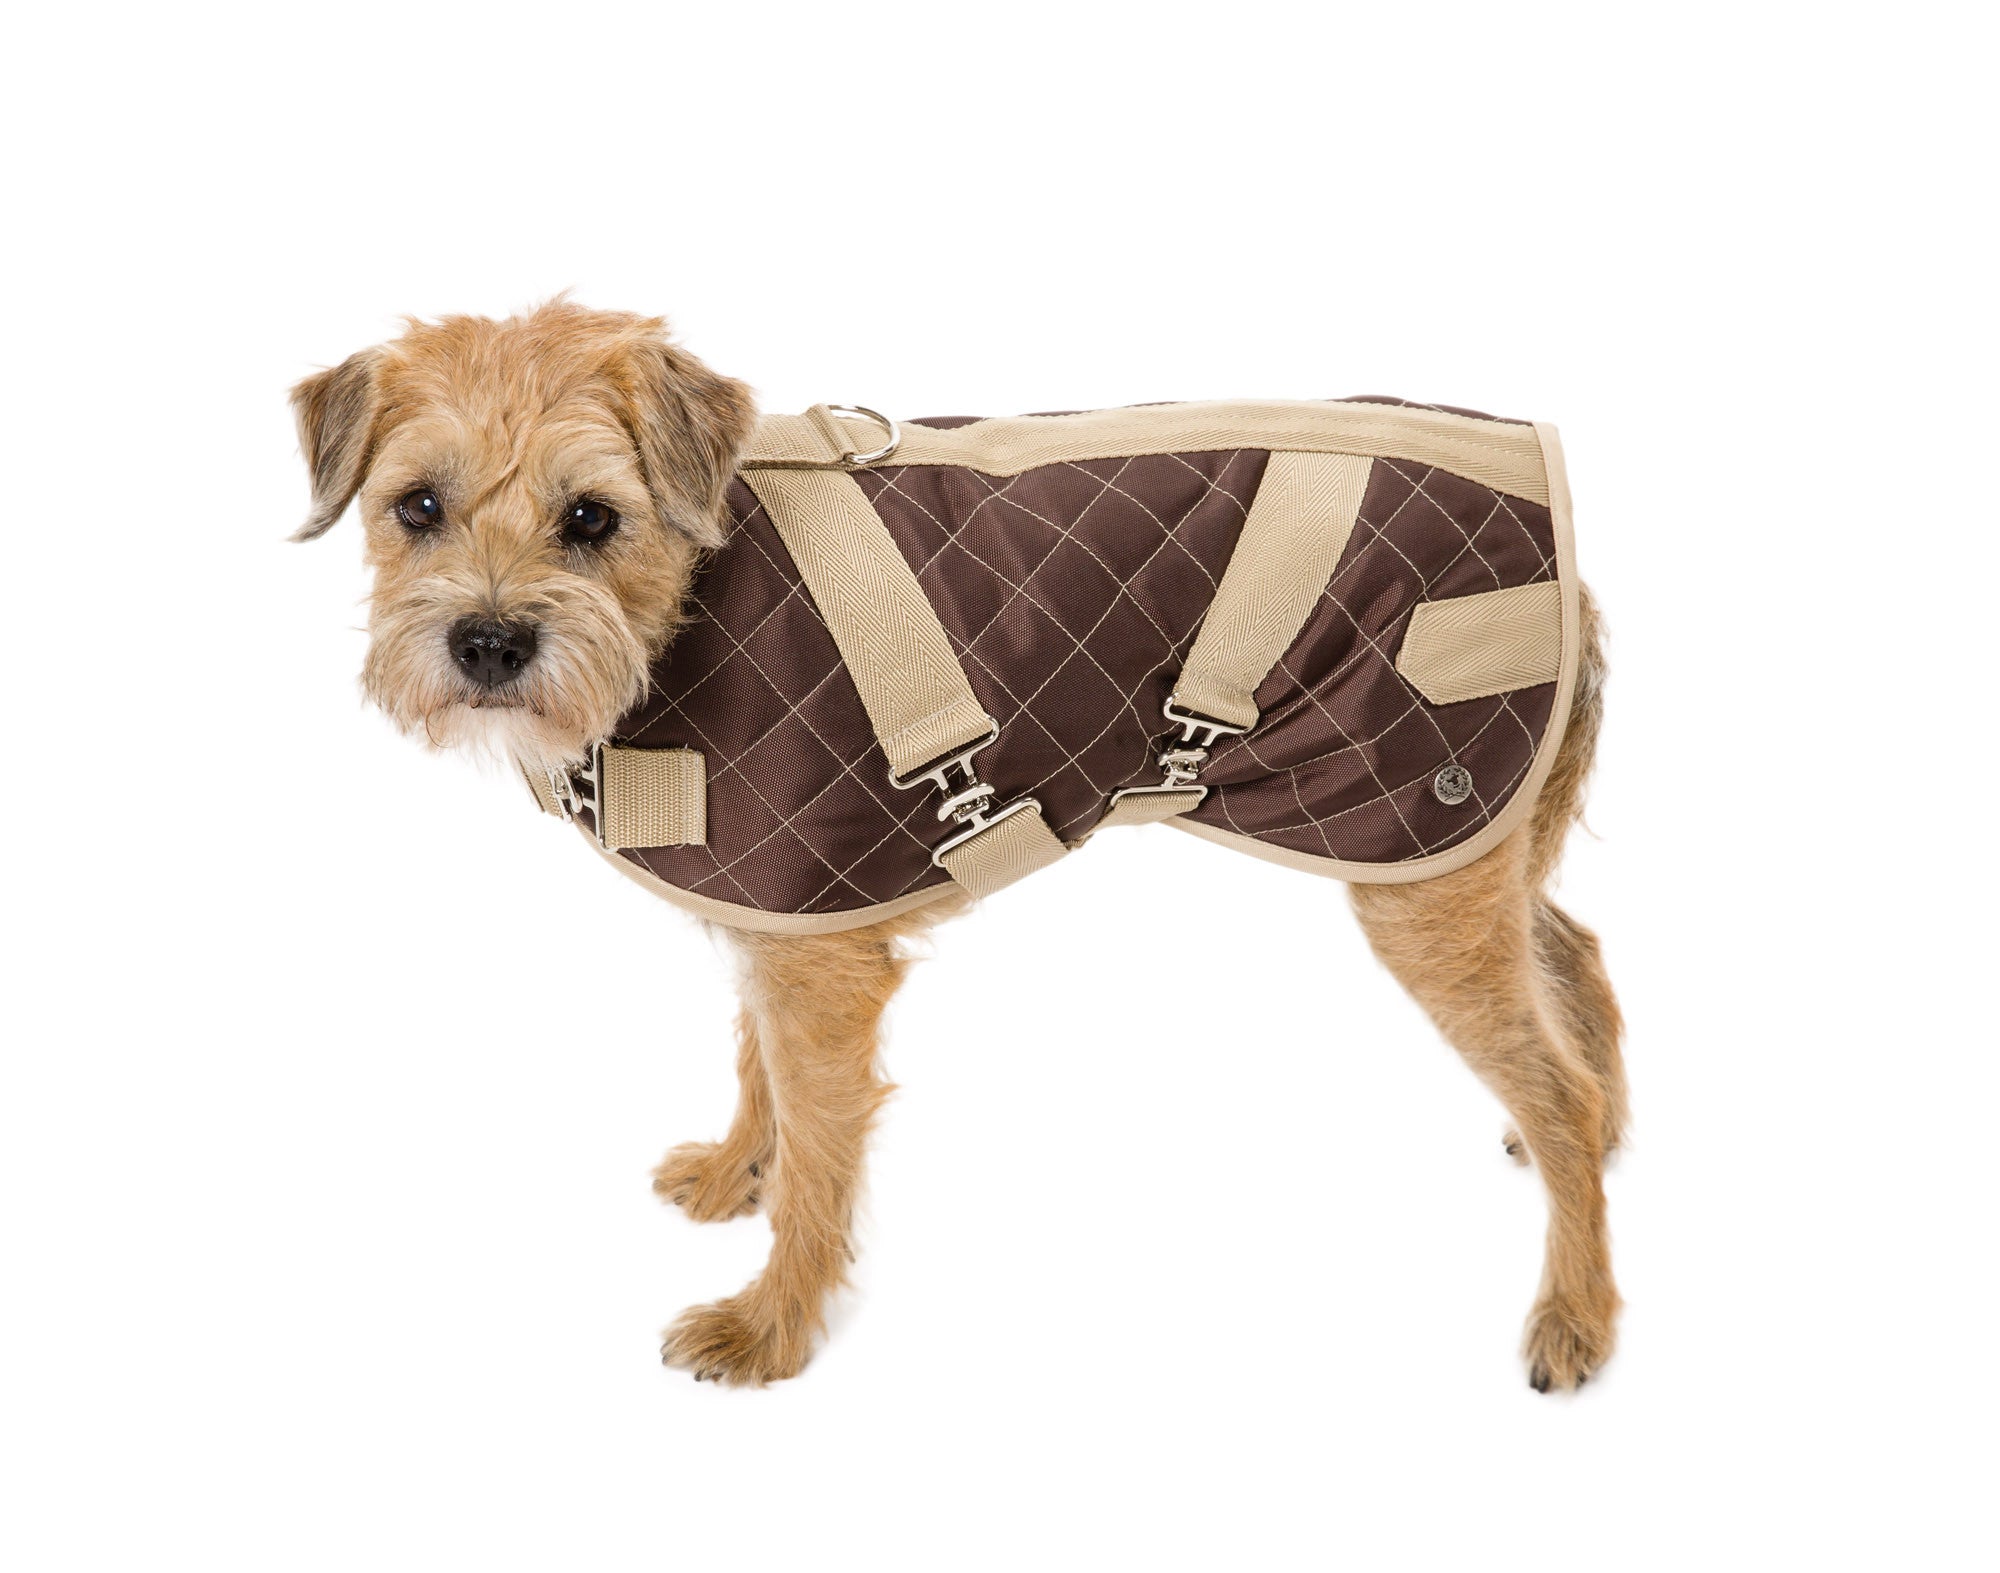 Horse Blanket - Quilted Coats - 4 Color Options - Navy, Brown, Orange & Loden